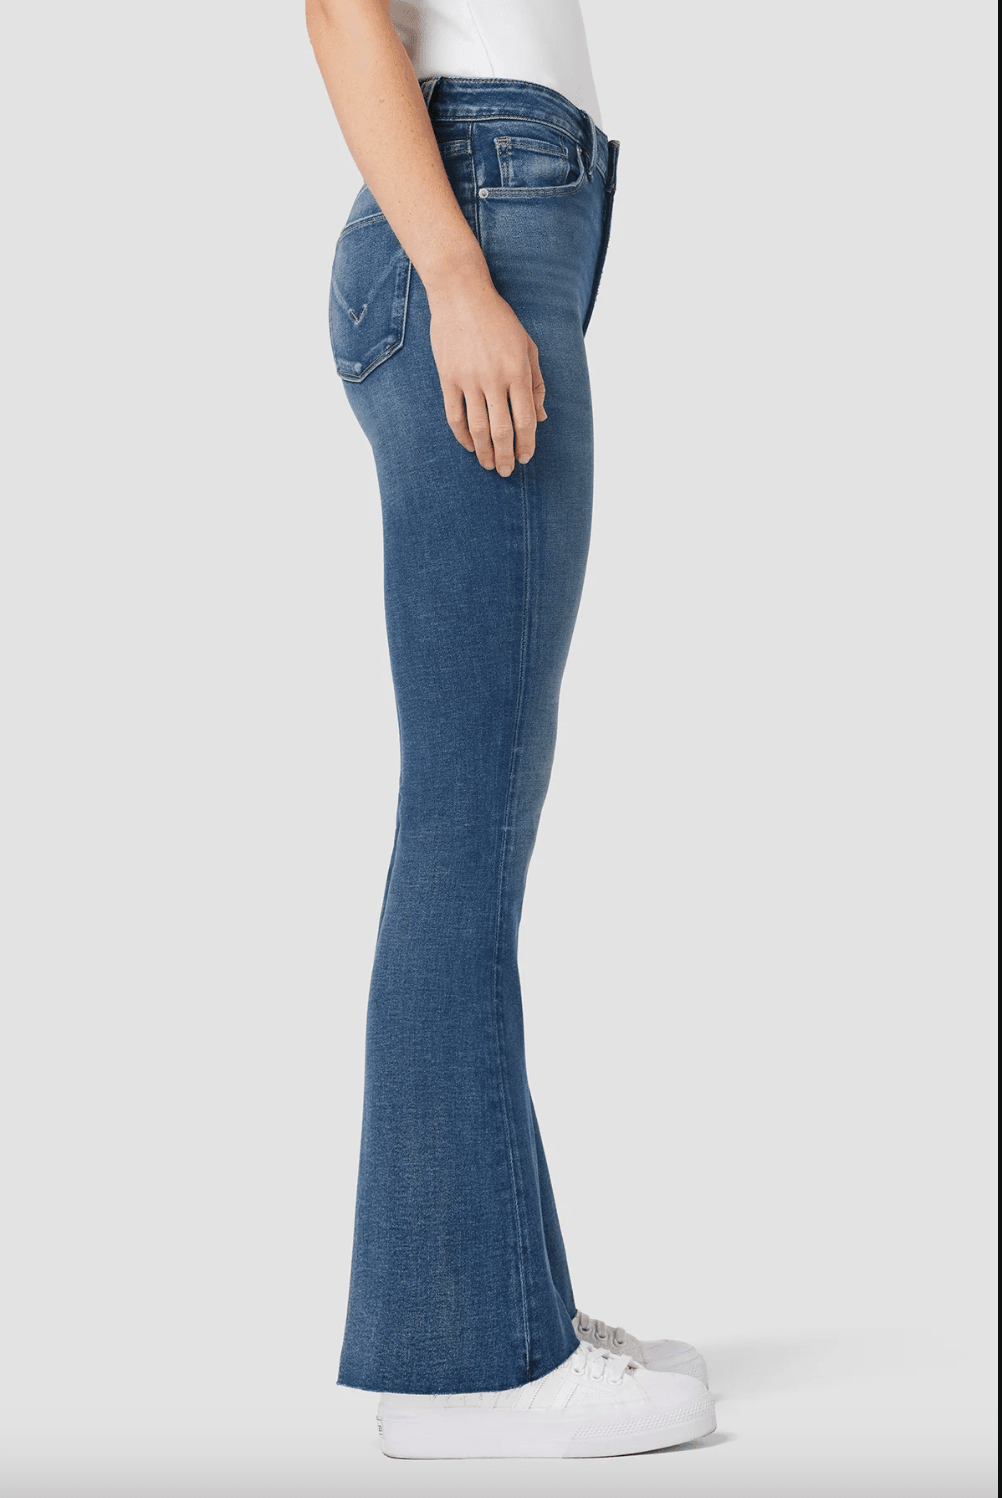 Holly High Rise Flare Jeans in Barefoot by Hudson